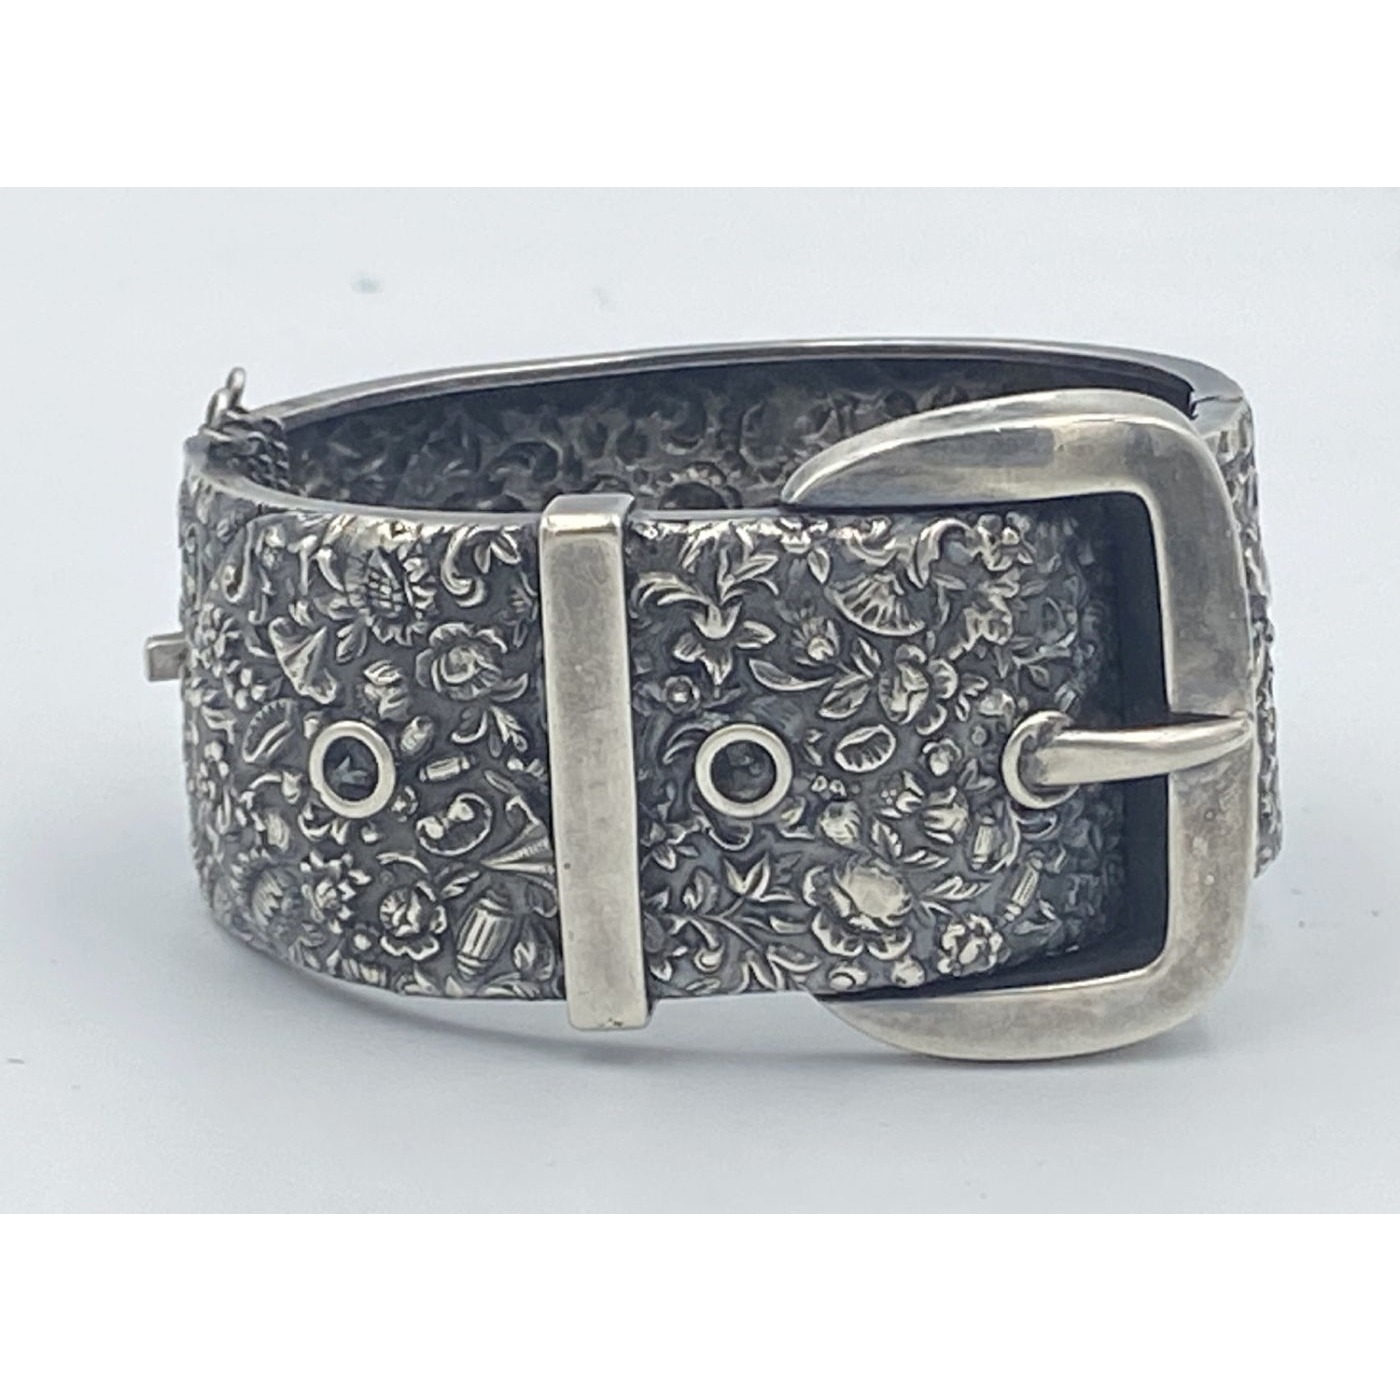 Very Best Victorian Sterling Buckle Bangle - WOW